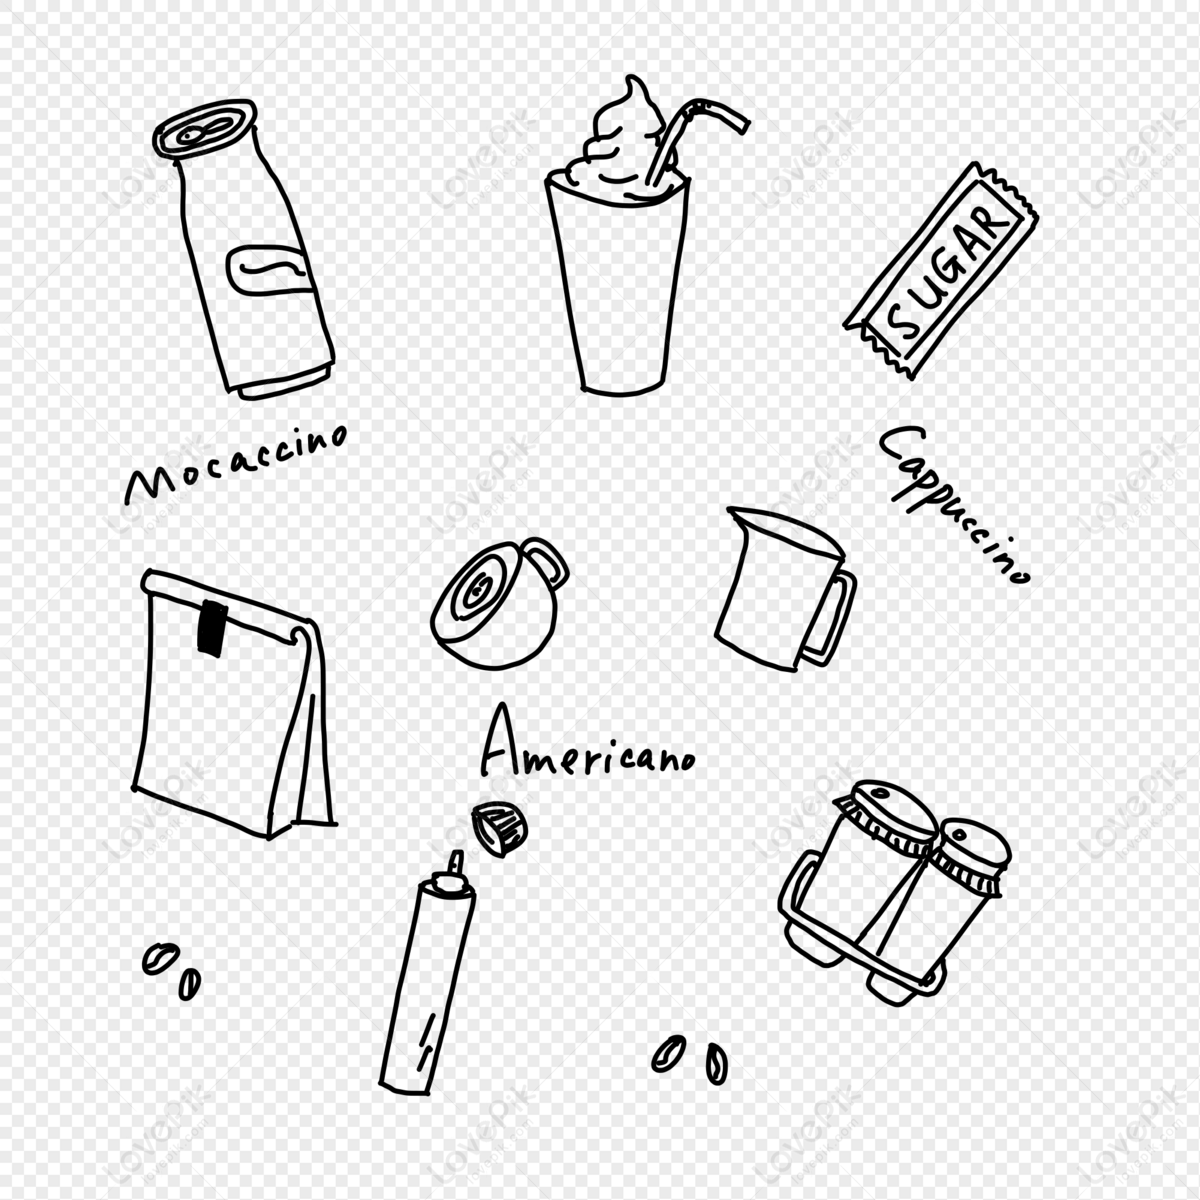 Recyclable Things And Products Kitchen Items Seamless Pattern Stock  Illustration - Download Image Now - iStock